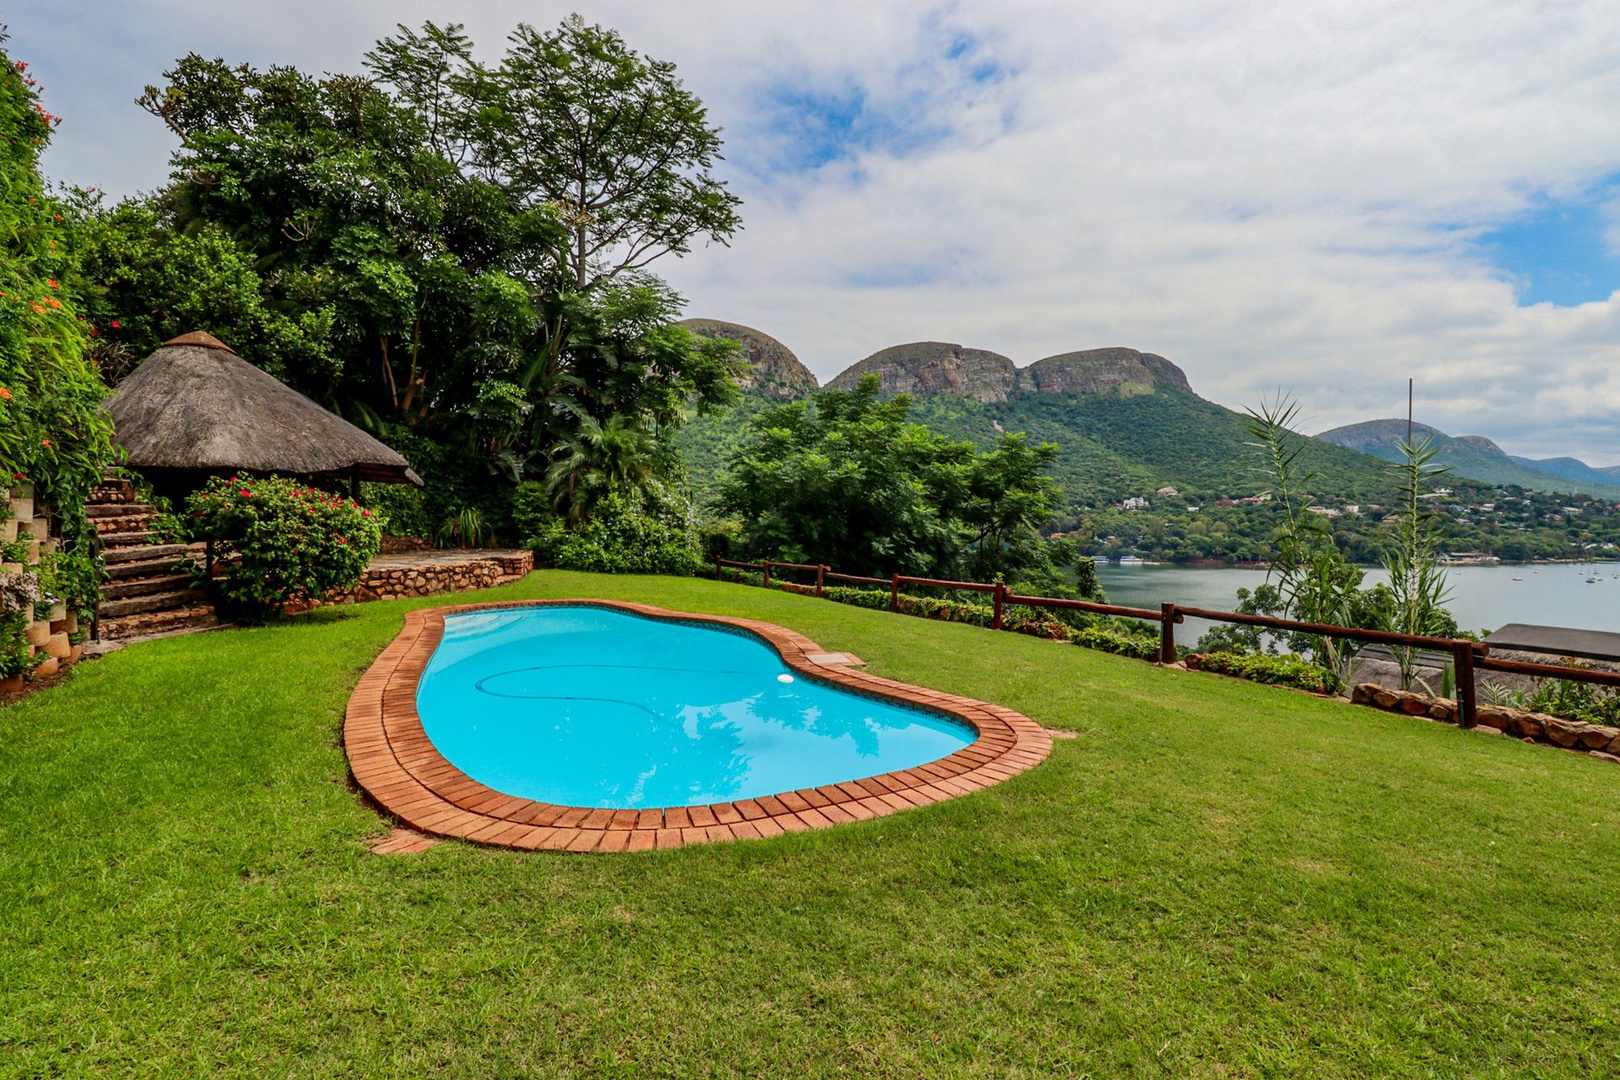 House in Kosmos - Pool and covered lapa have fabulous views over the dam!